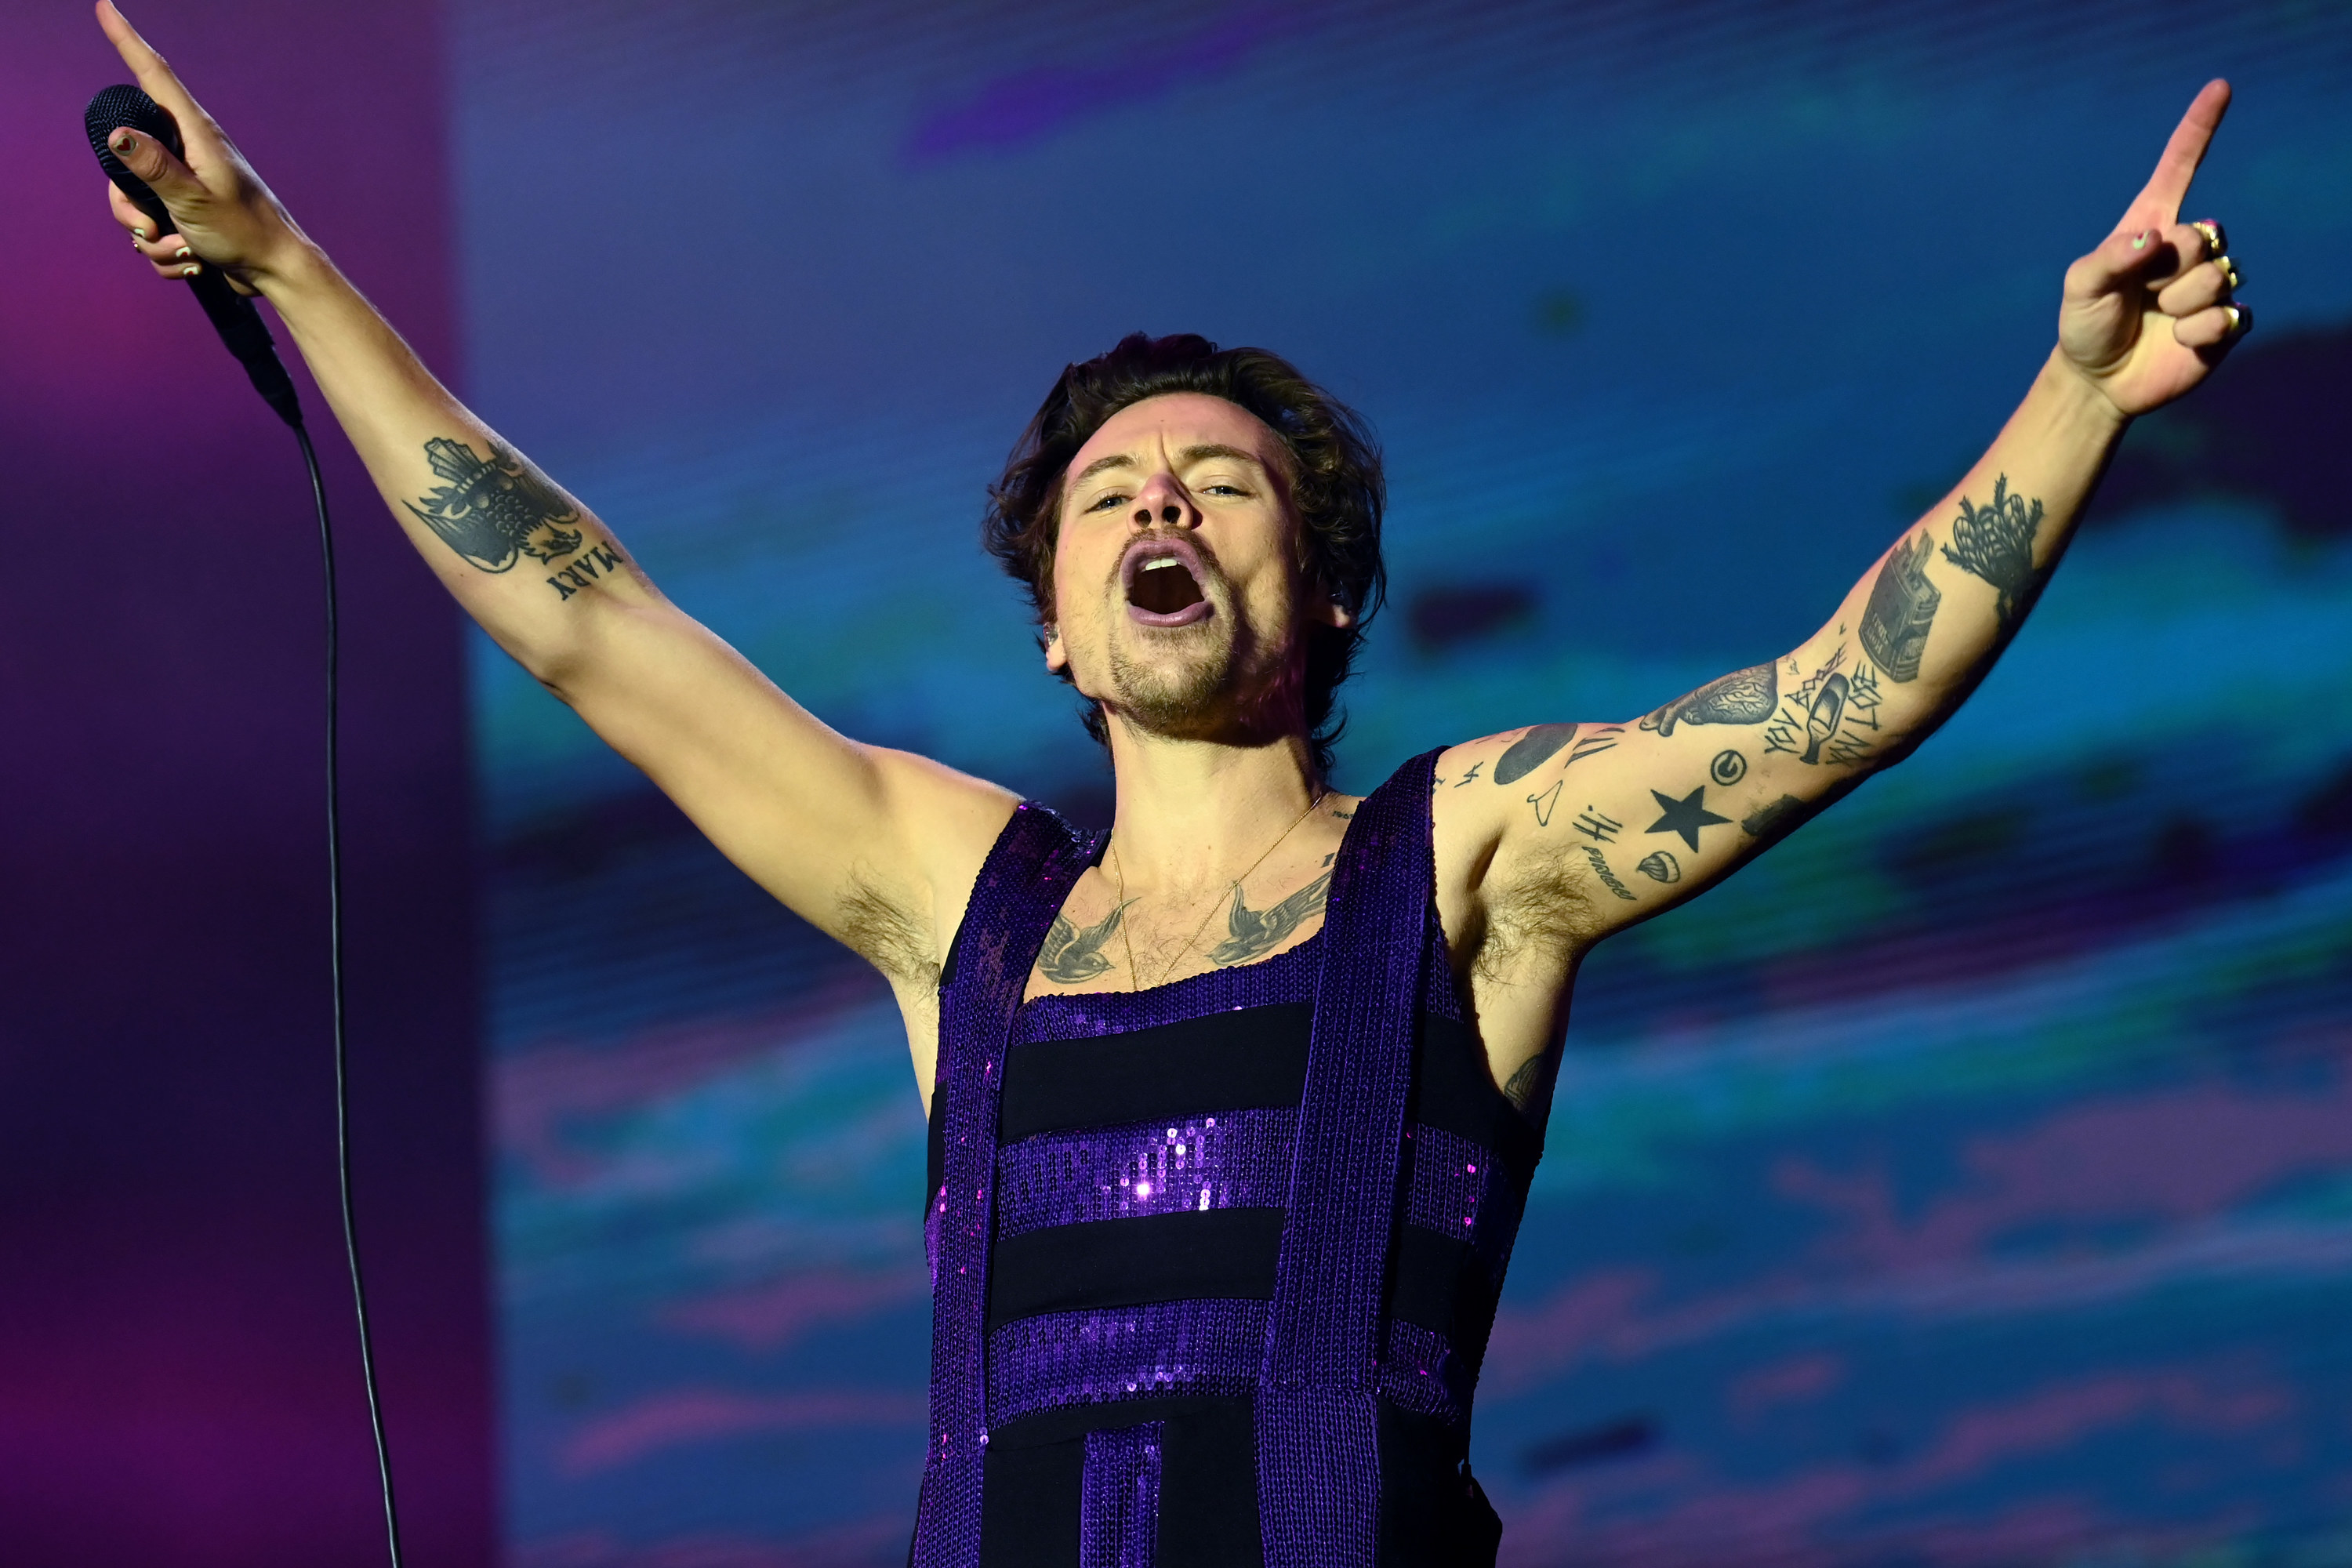 A closeup of Harry performing